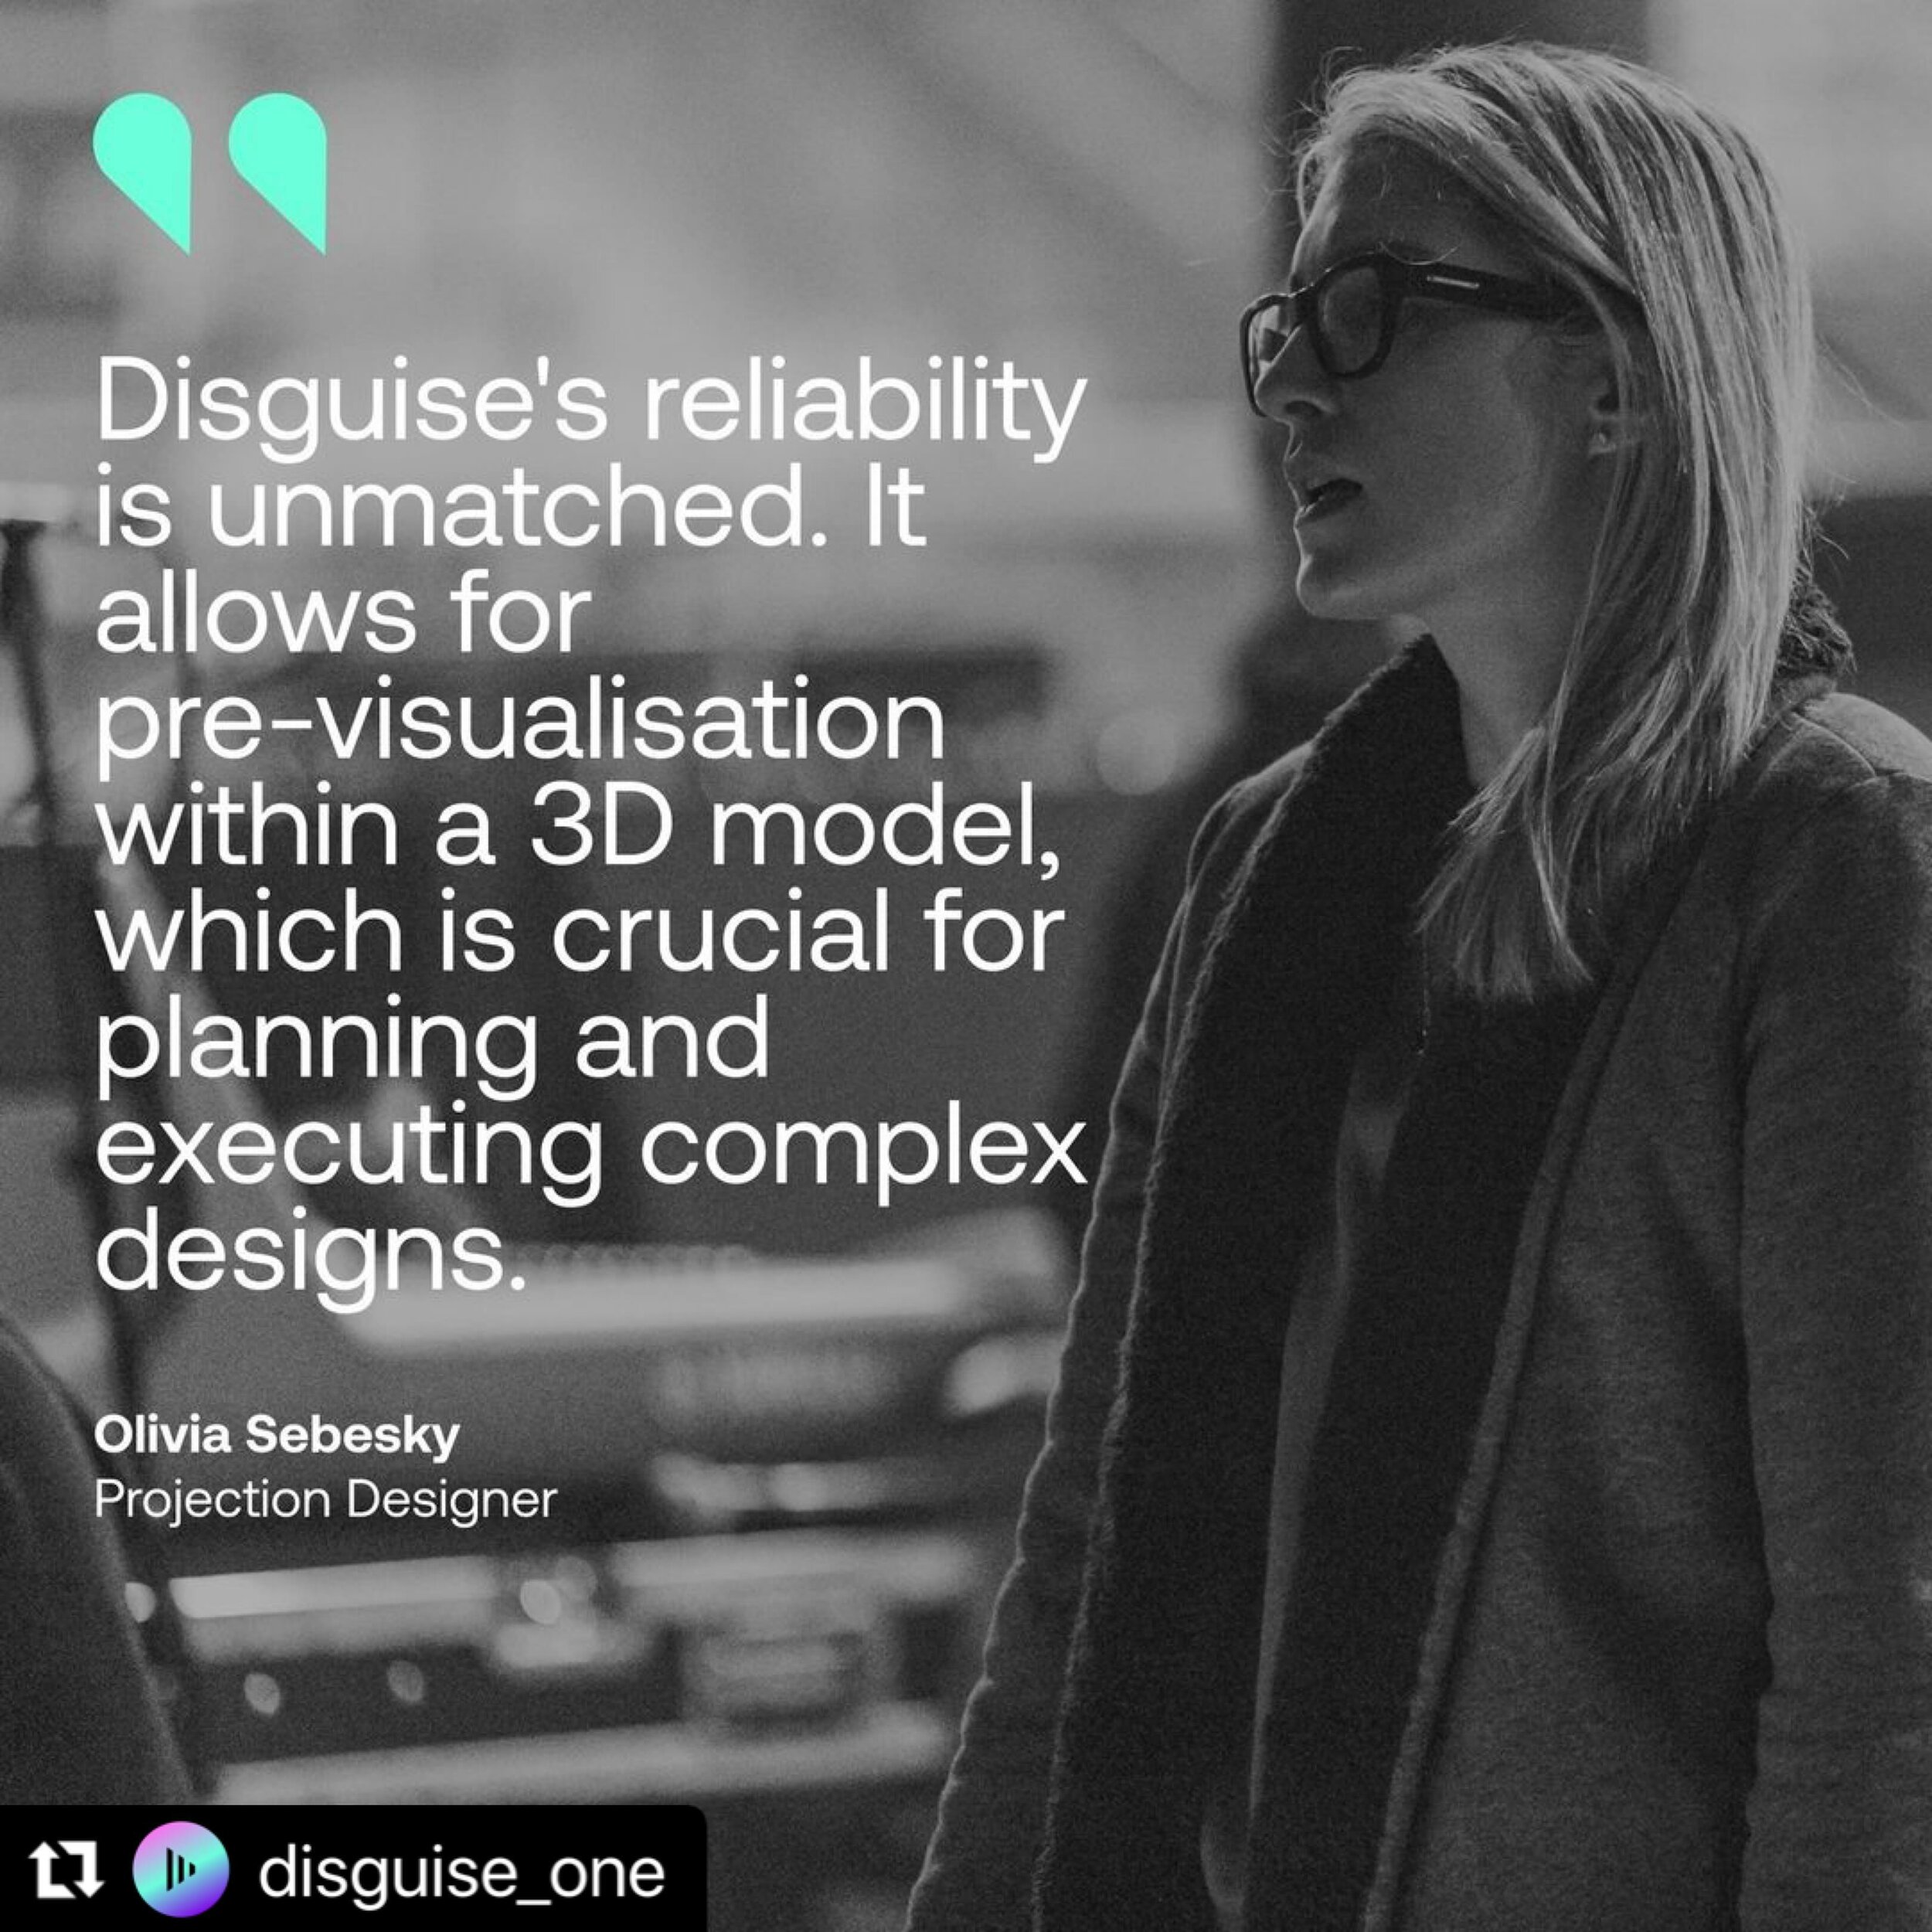 #Repost thank you @disguise_one for this feature!
・・・
What better way to kick off Women&rsquo;s History Month, than to spotlight award-winning Projection Designer, Multimedia Art Director, and Motion Graphics Designer, Olivia Sebesky? Together we div